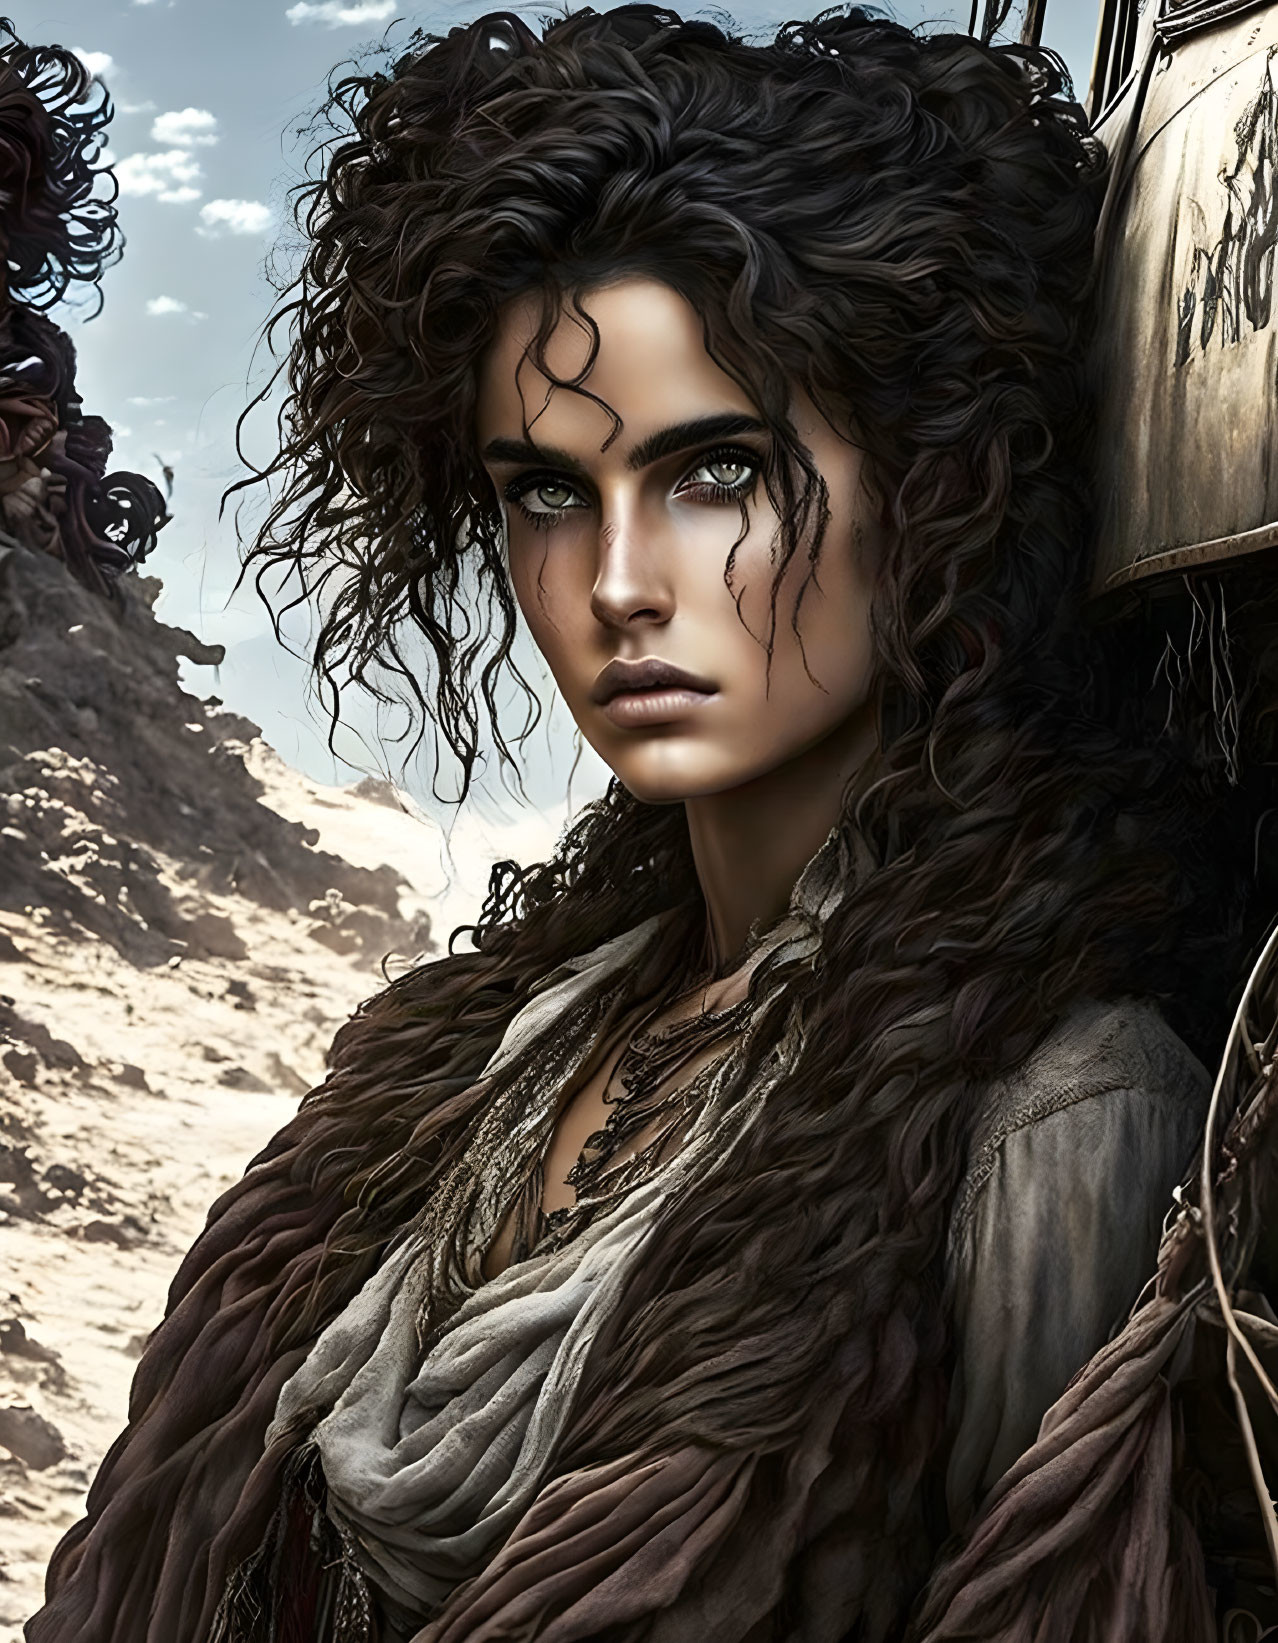 Curly-haired woman in layered clothing in desert with vehicle edge.